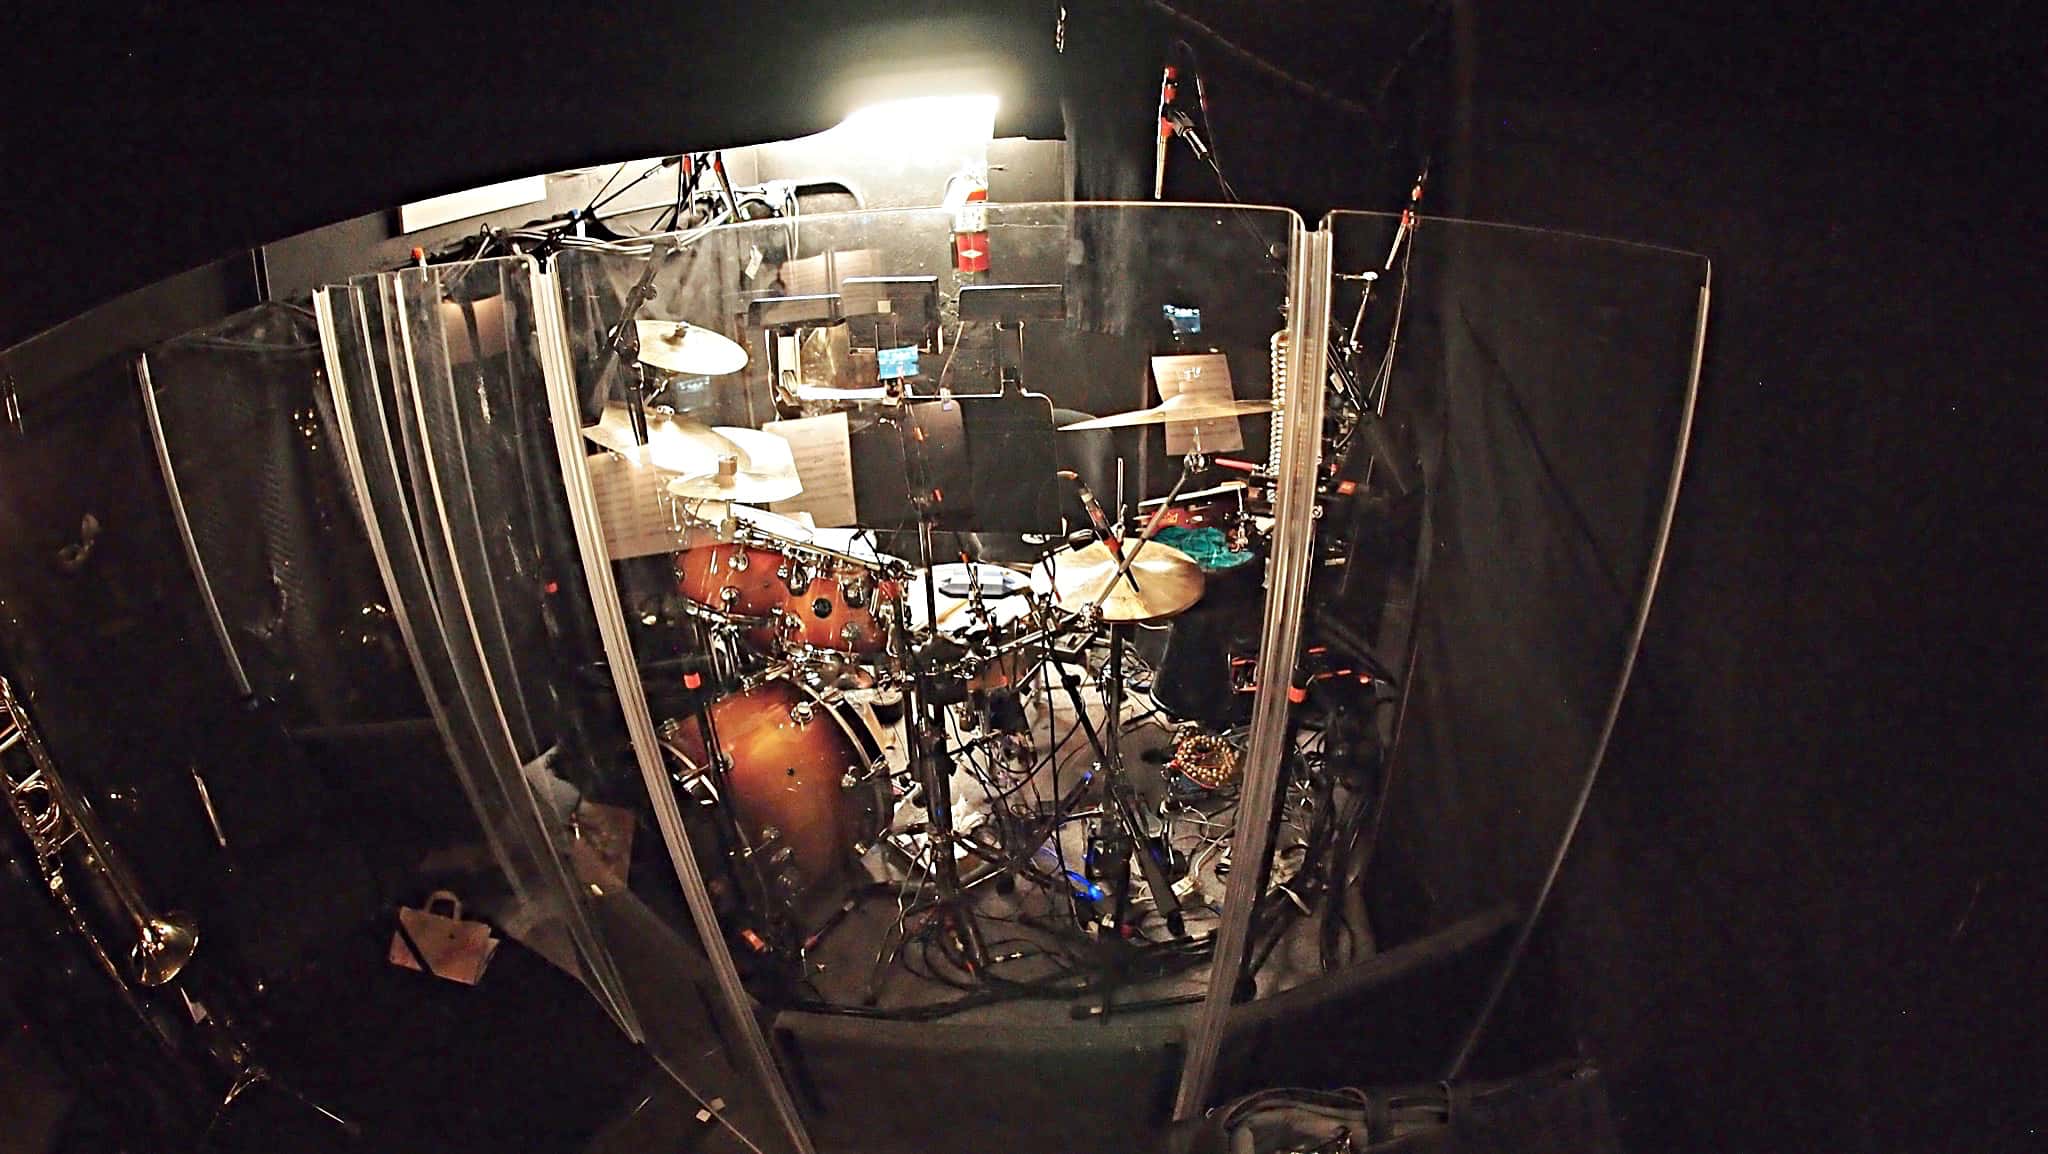 Danny Taylor’s drum set setup for the North American tour of Aladdin at the Paramount Theatre in Seattle, Washington.